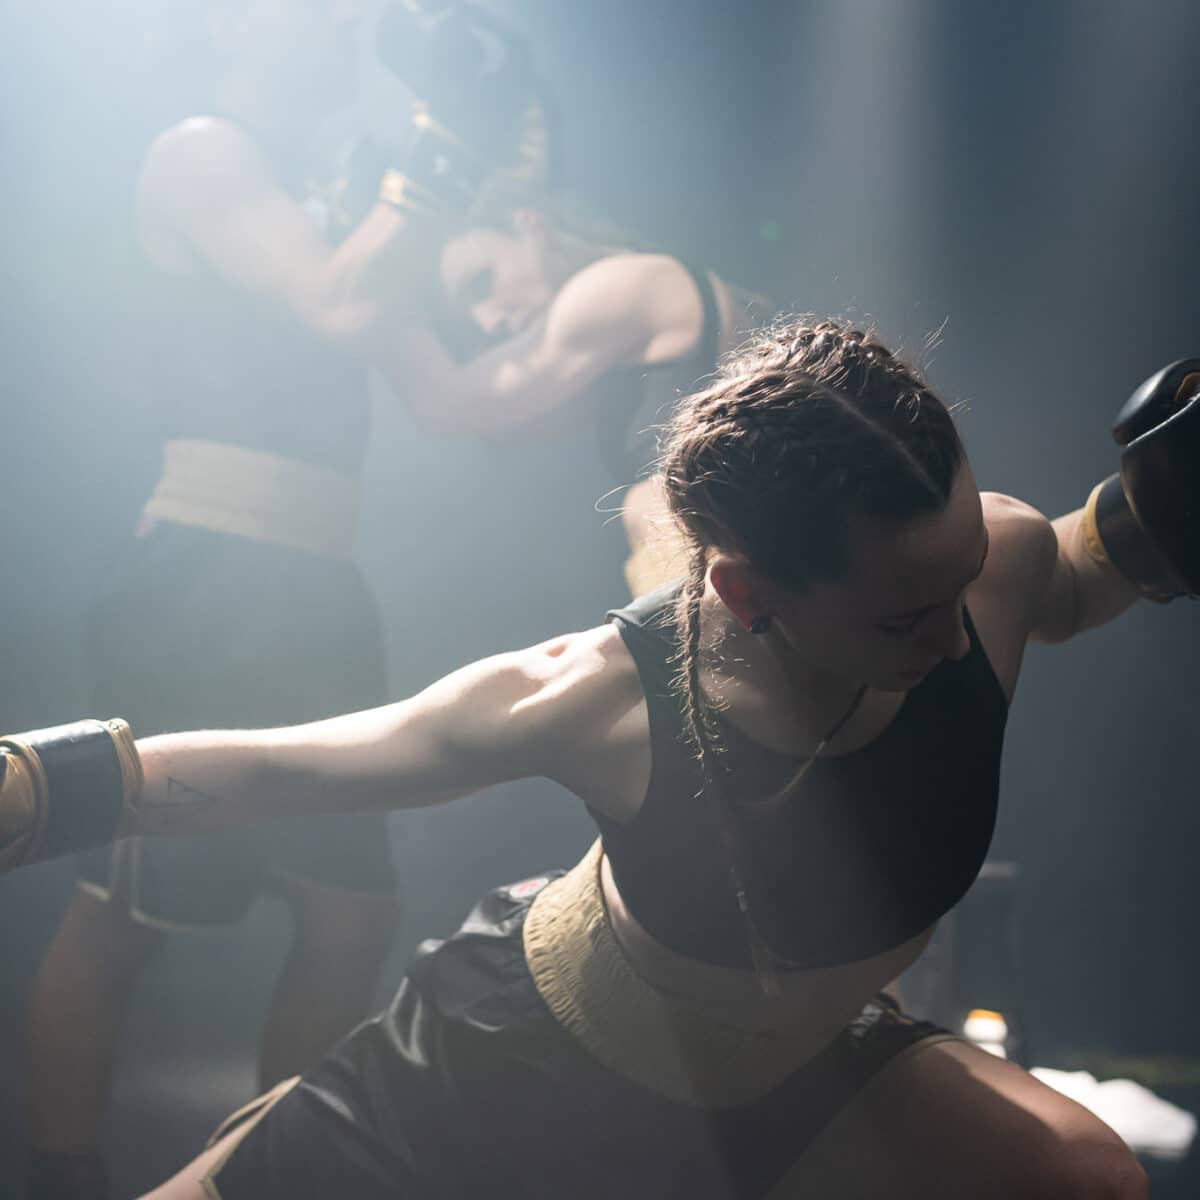 A female young dancer in a performance pose with boxing gloves in dim, dramatic light.